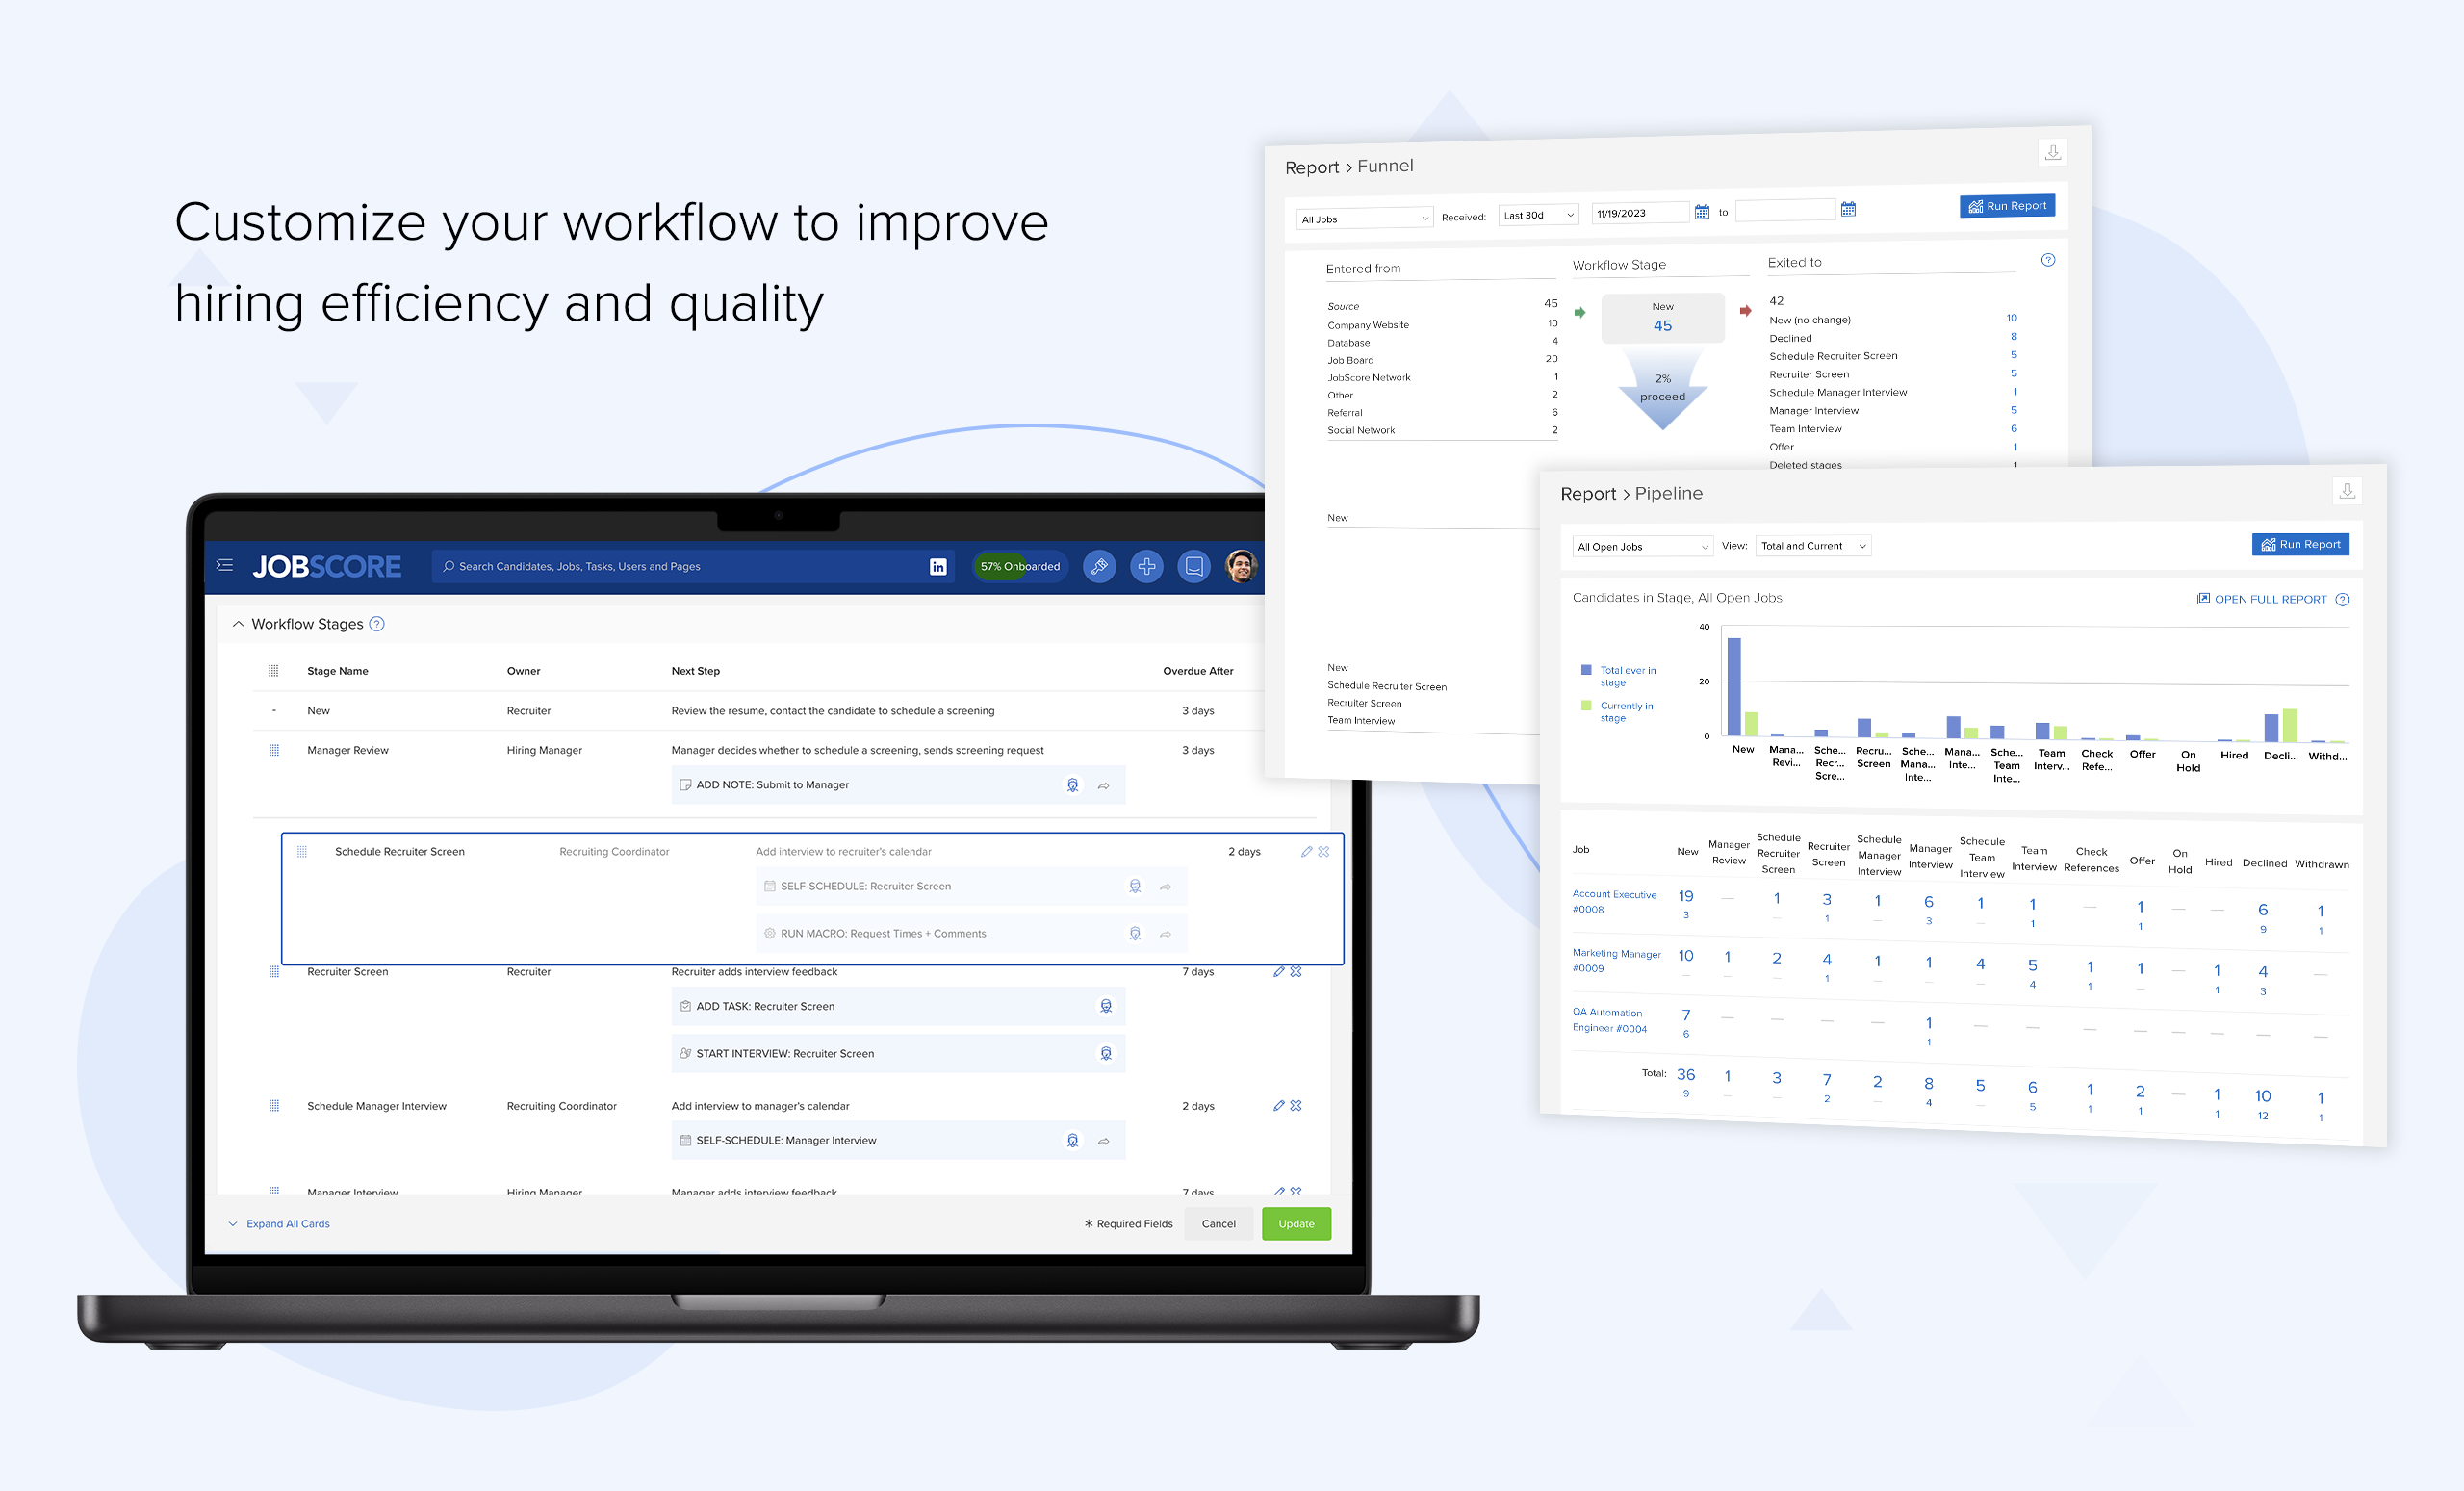 Customize your workflow to improve hiring efficiency and quality
